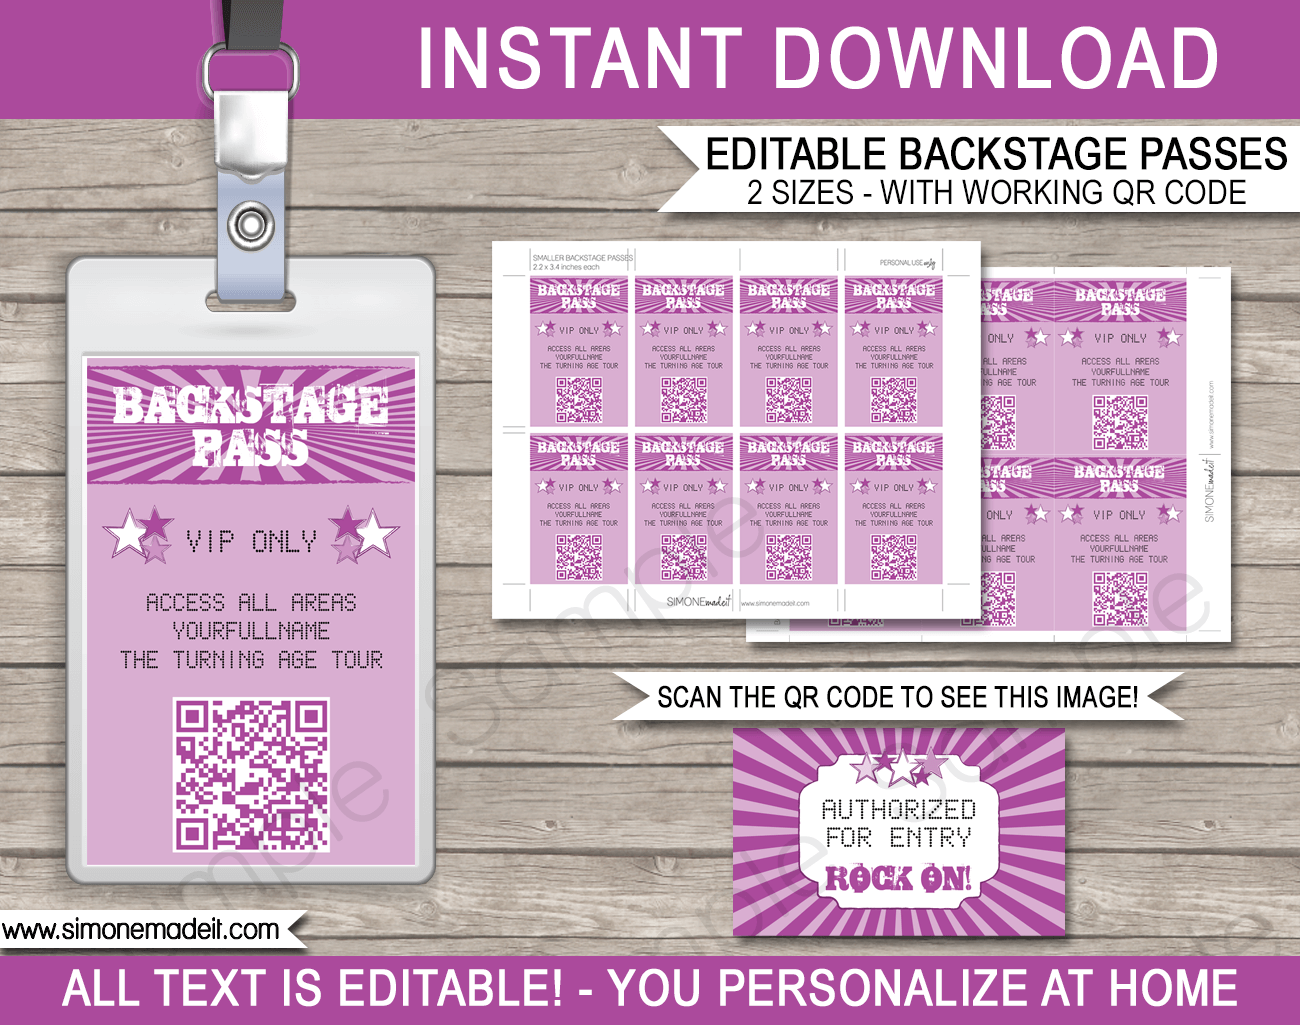 Rock Star Party Backstage Passes | Printable Inserts | QR Codes | Party Favors | Birthday Party | Editable DIY Template | $3.50 INSTANT DOWNLOAD via SIMONEmadeit.com